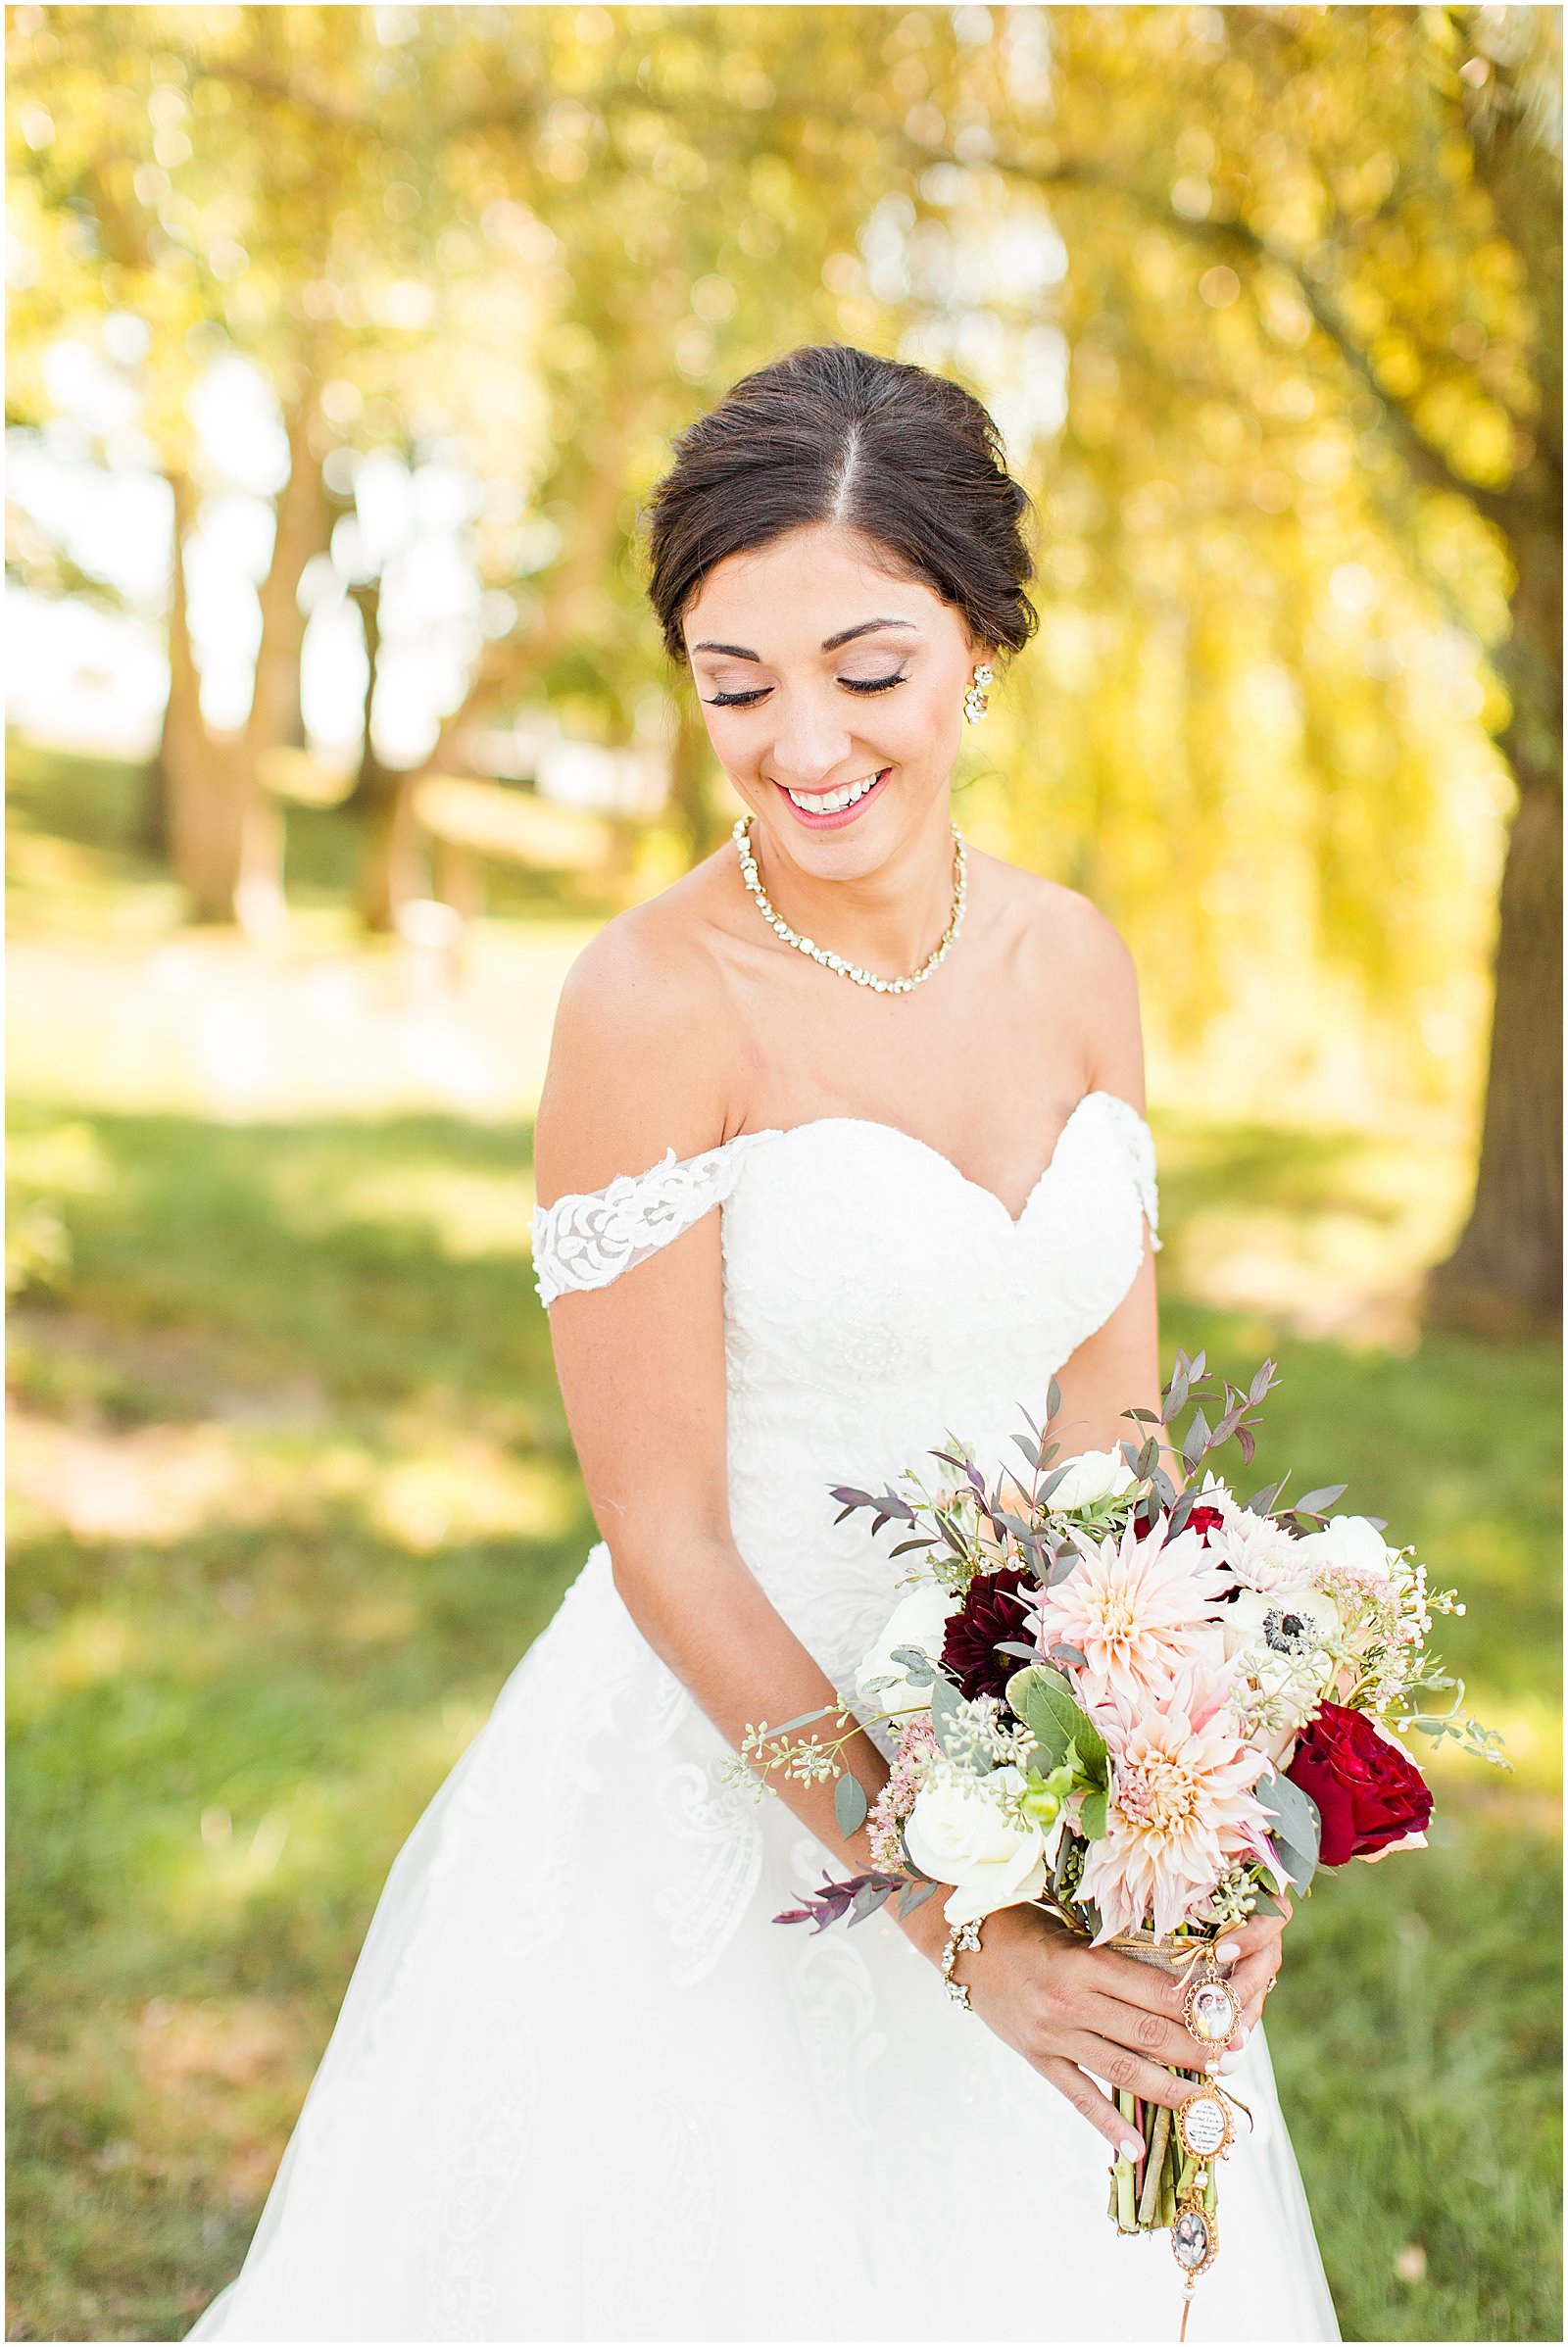 A Stunning Fall Wedding in Indianapolis, IN |. Sally and Andrew | Bret and Brandie Photography 0090.jpg